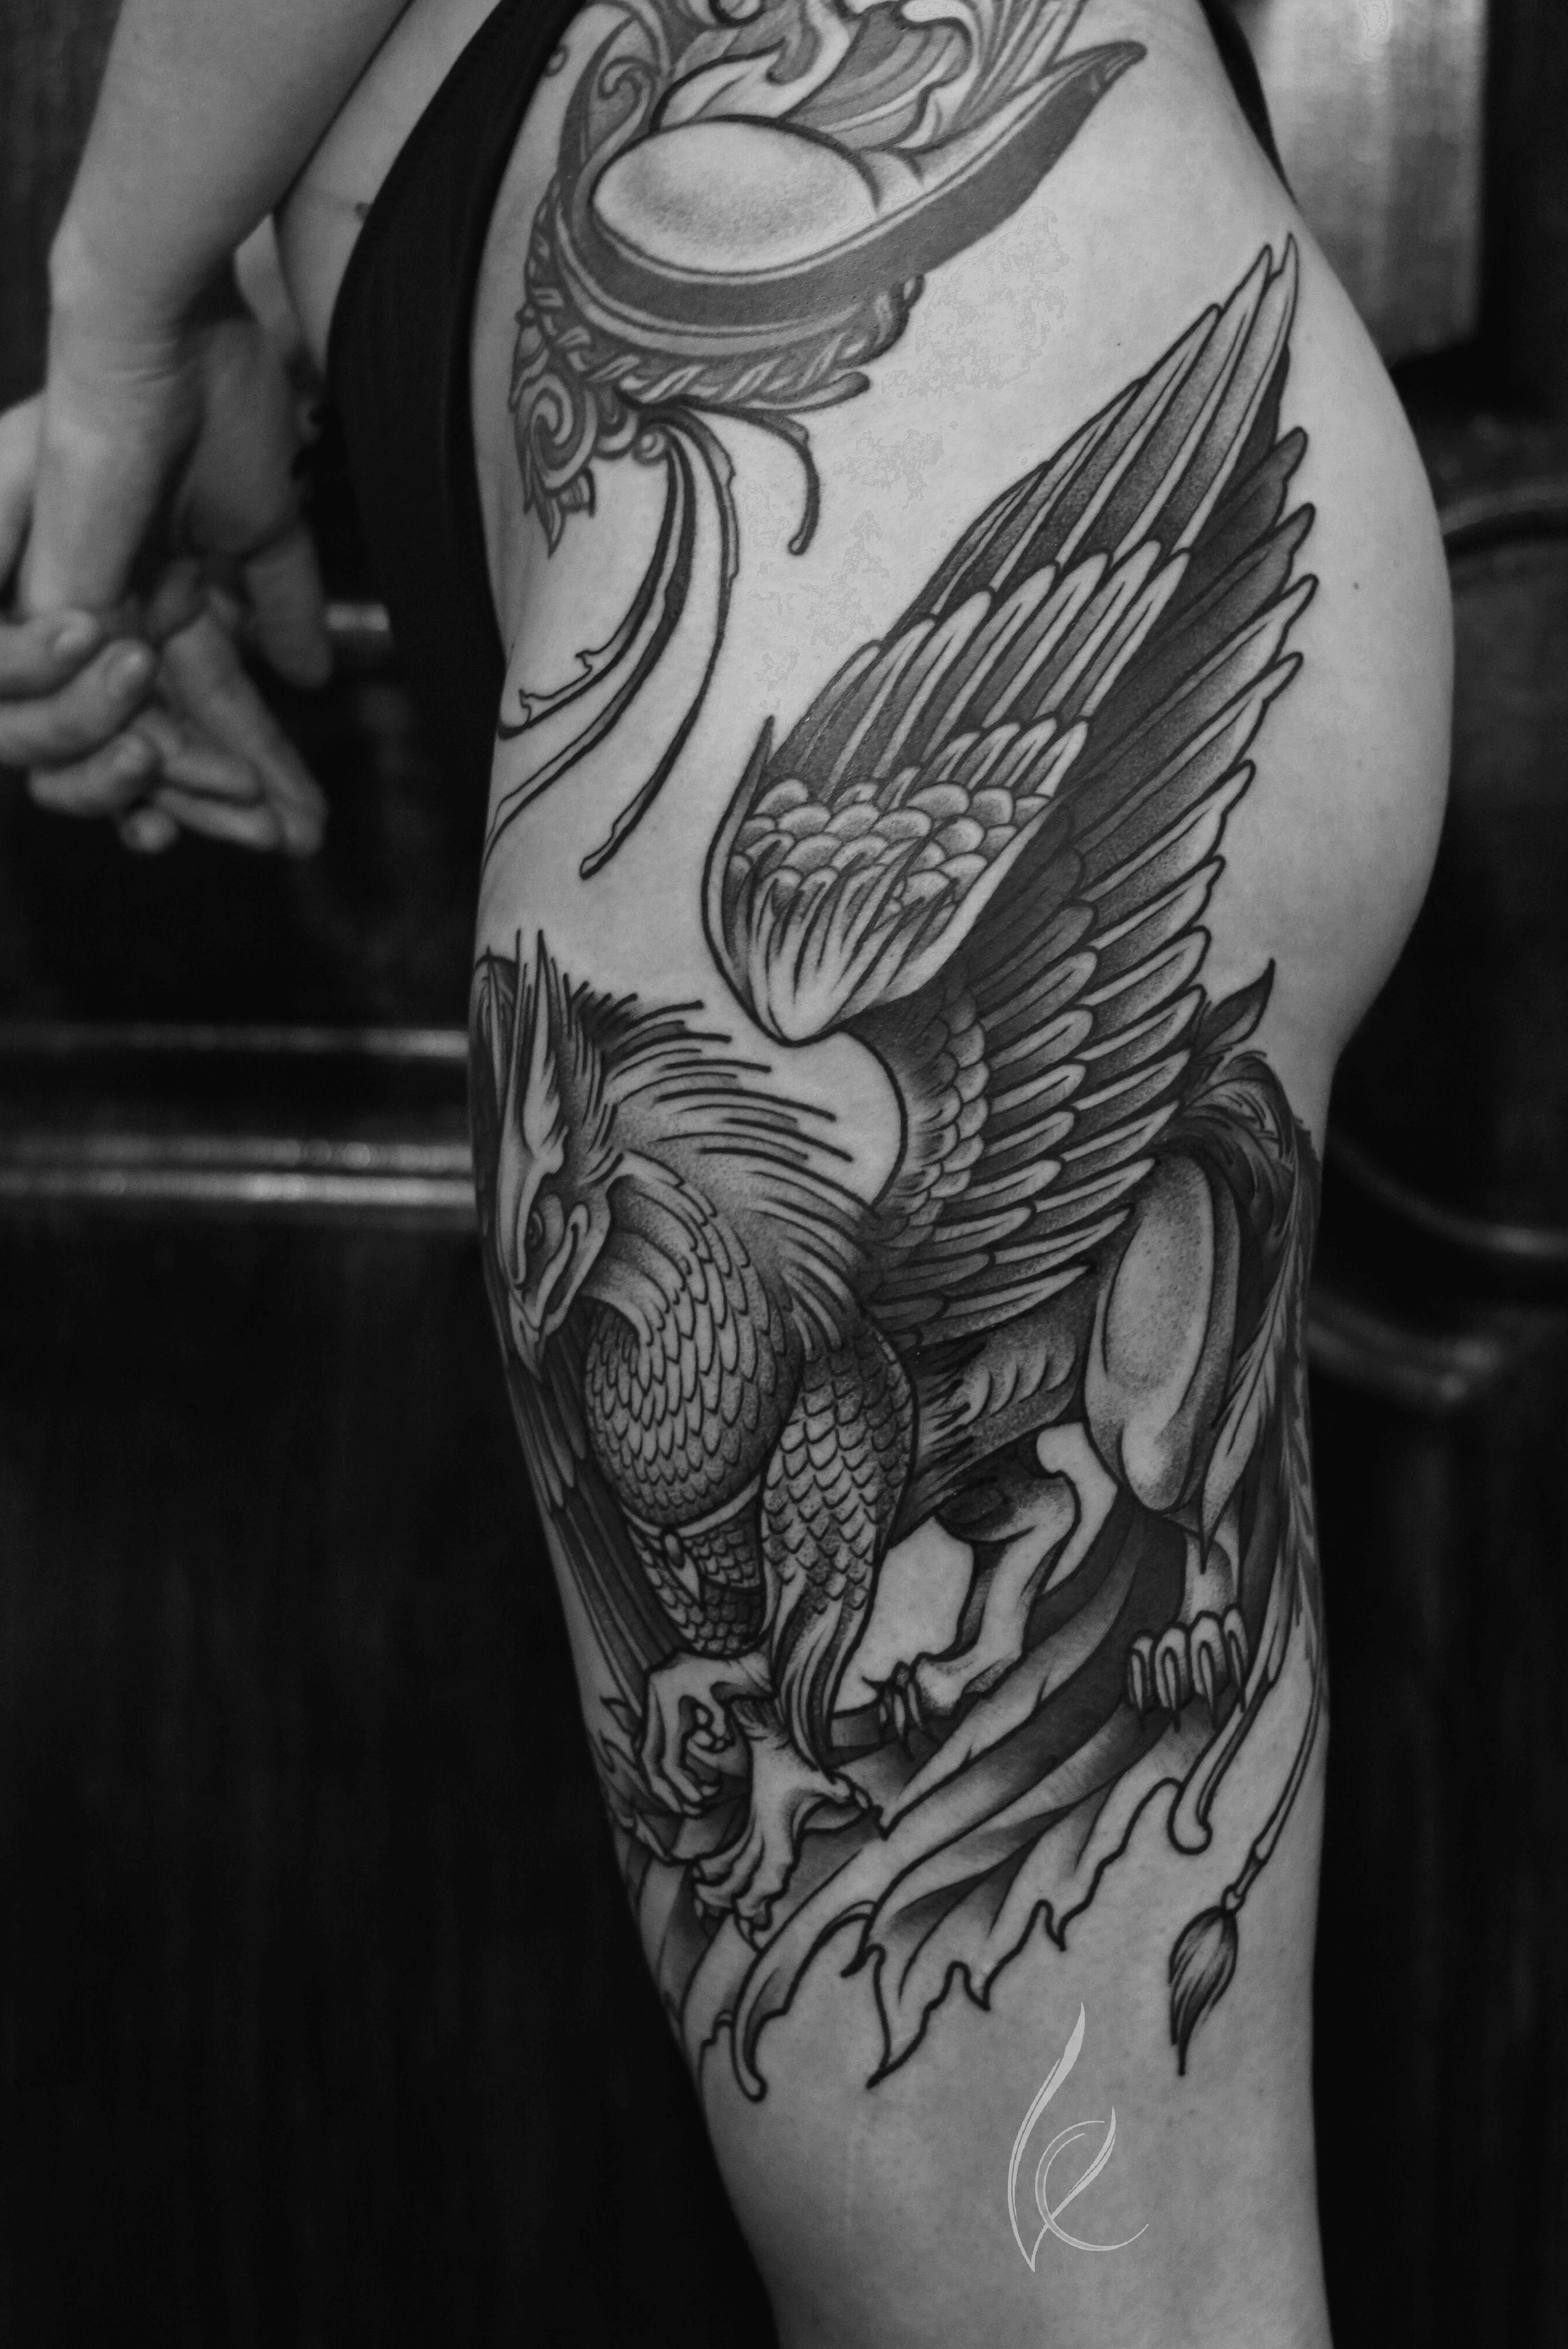 Griffin tattoo by David Choquette  Encre Noir in Montreal Quebec   rtattoos